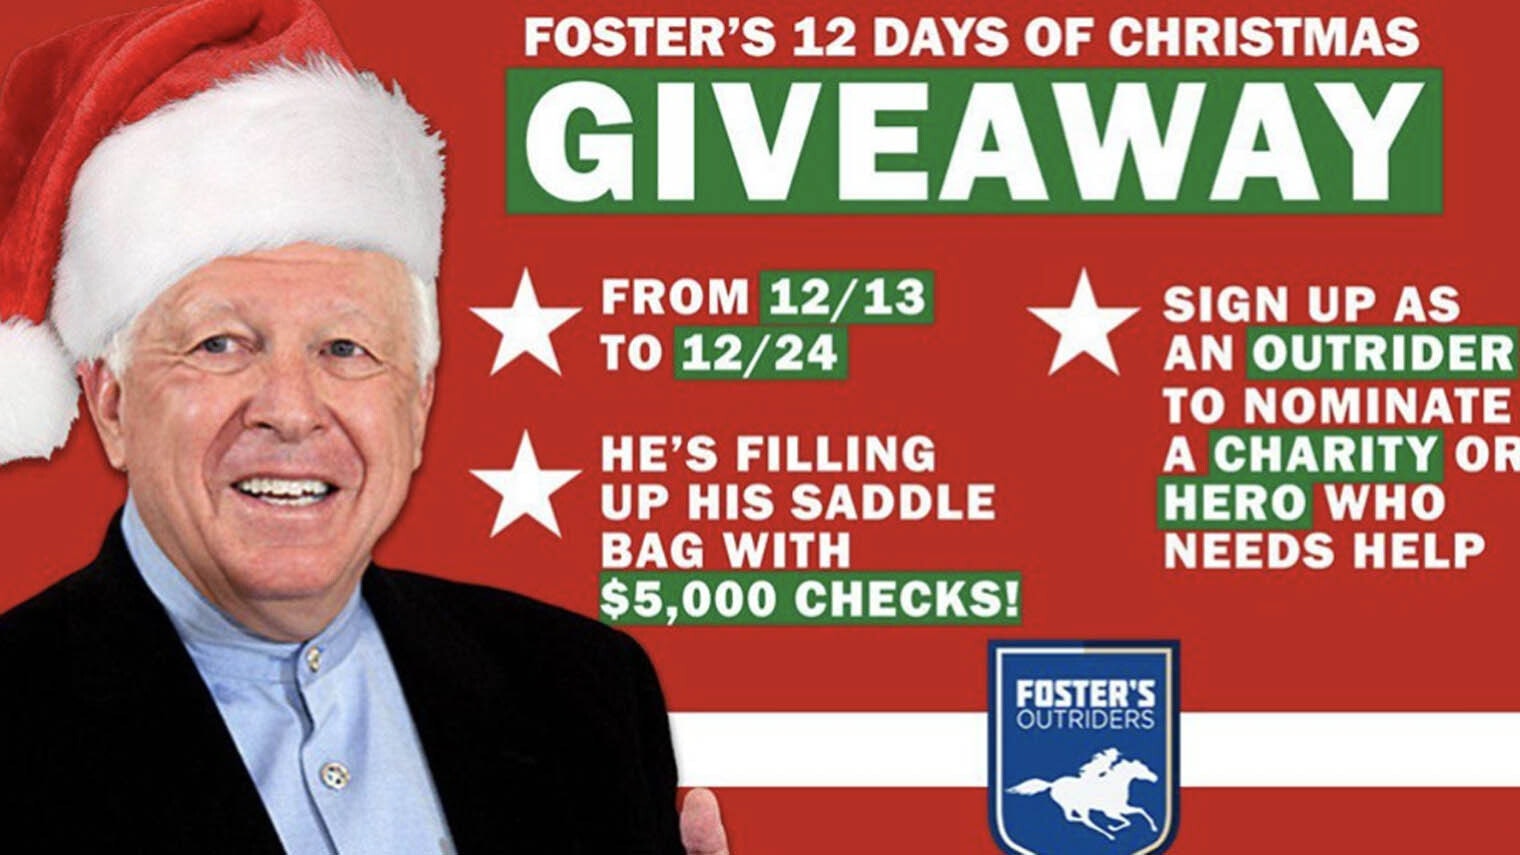 Foster giveaway